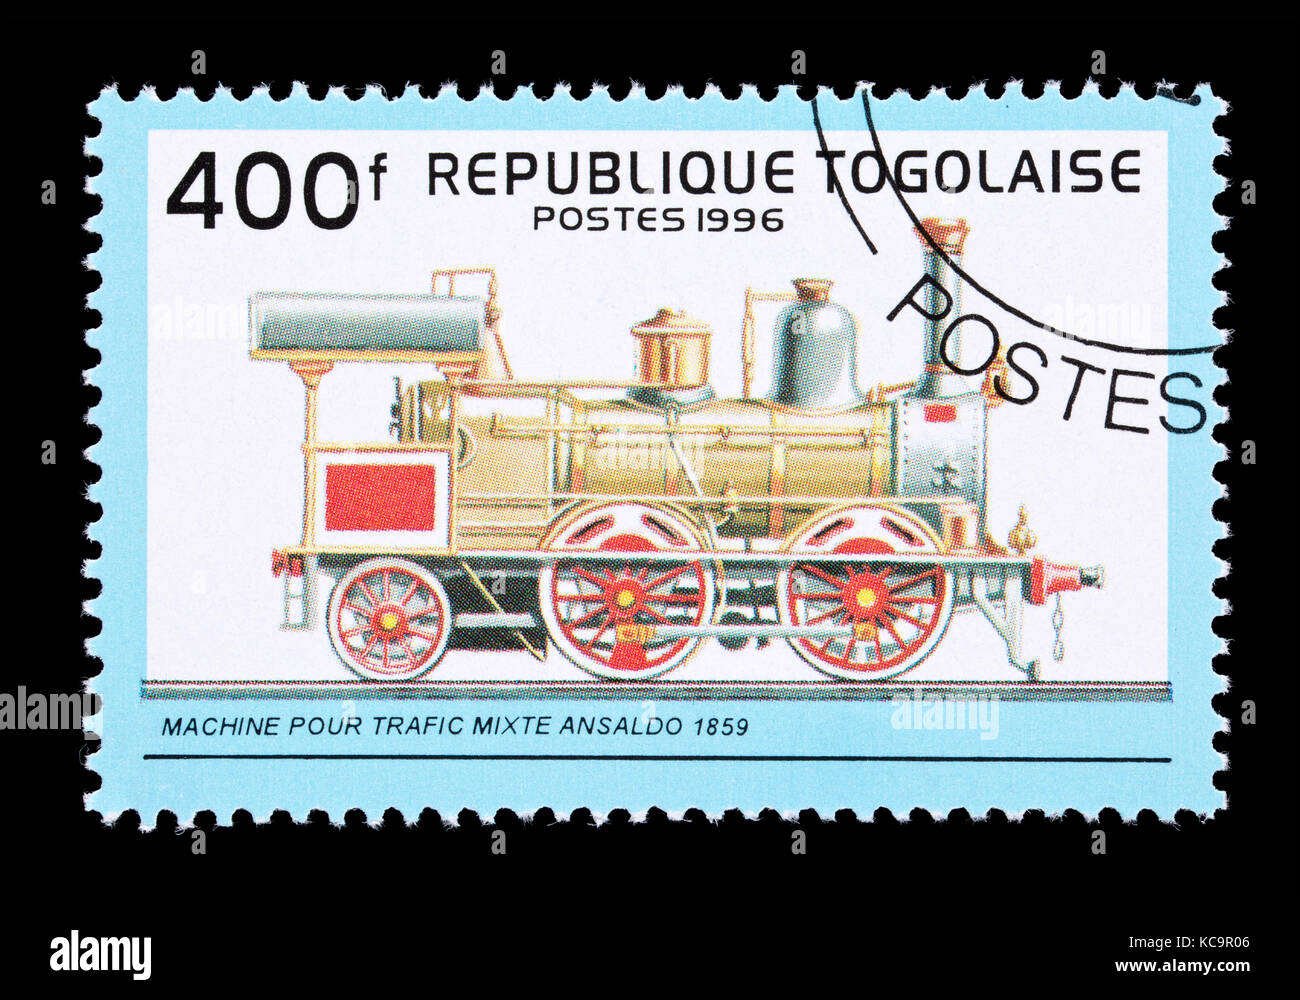 Postage stamp from Togo depicting an Ansaldo cargo and passenger locomotive from 1850 Stock Photo